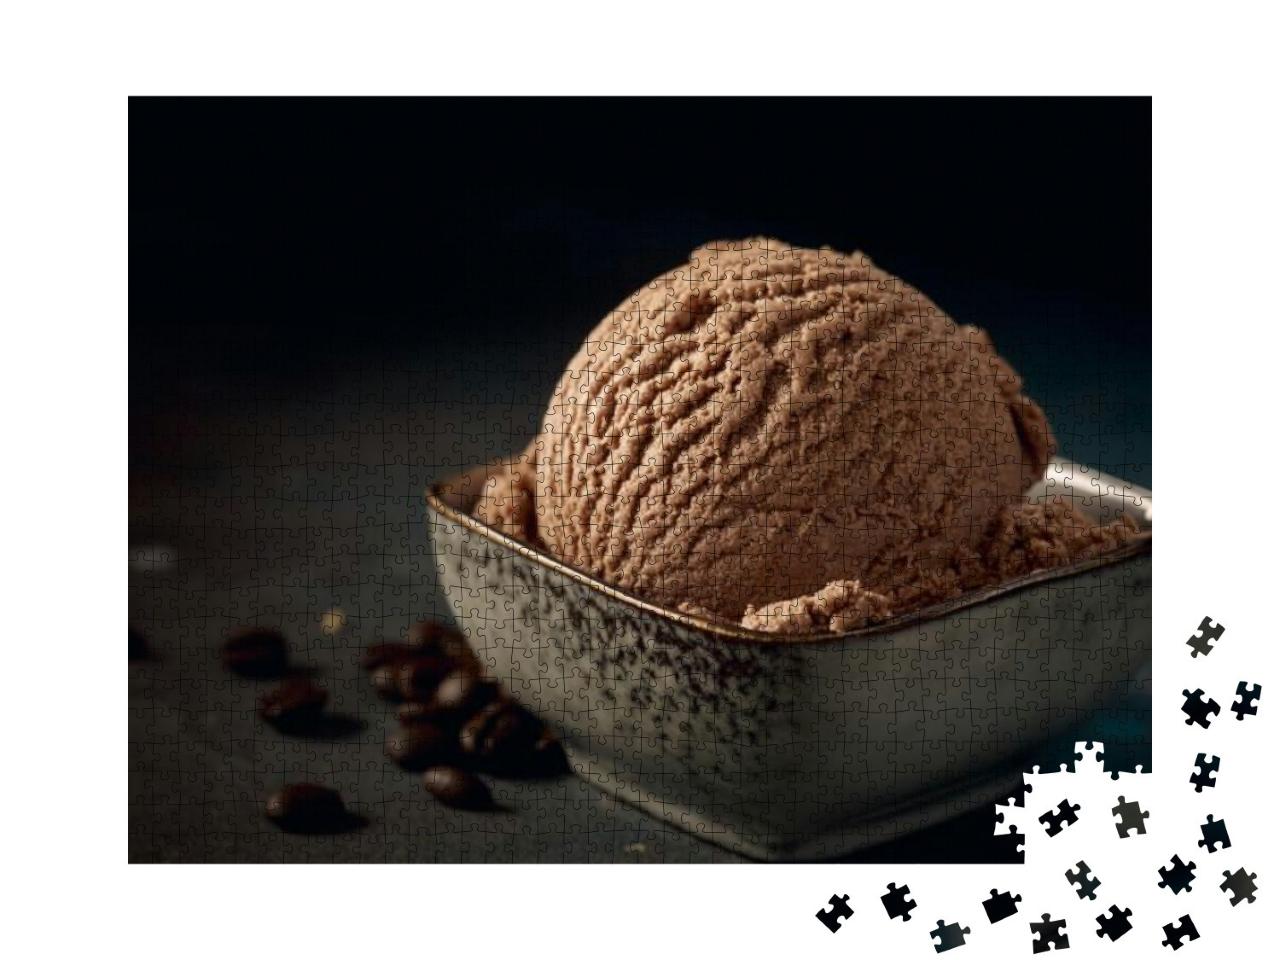 Scoop of Tasty Chocolate Gelato with Creamy Texture in Sq... Jigsaw Puzzle with 1000 pieces